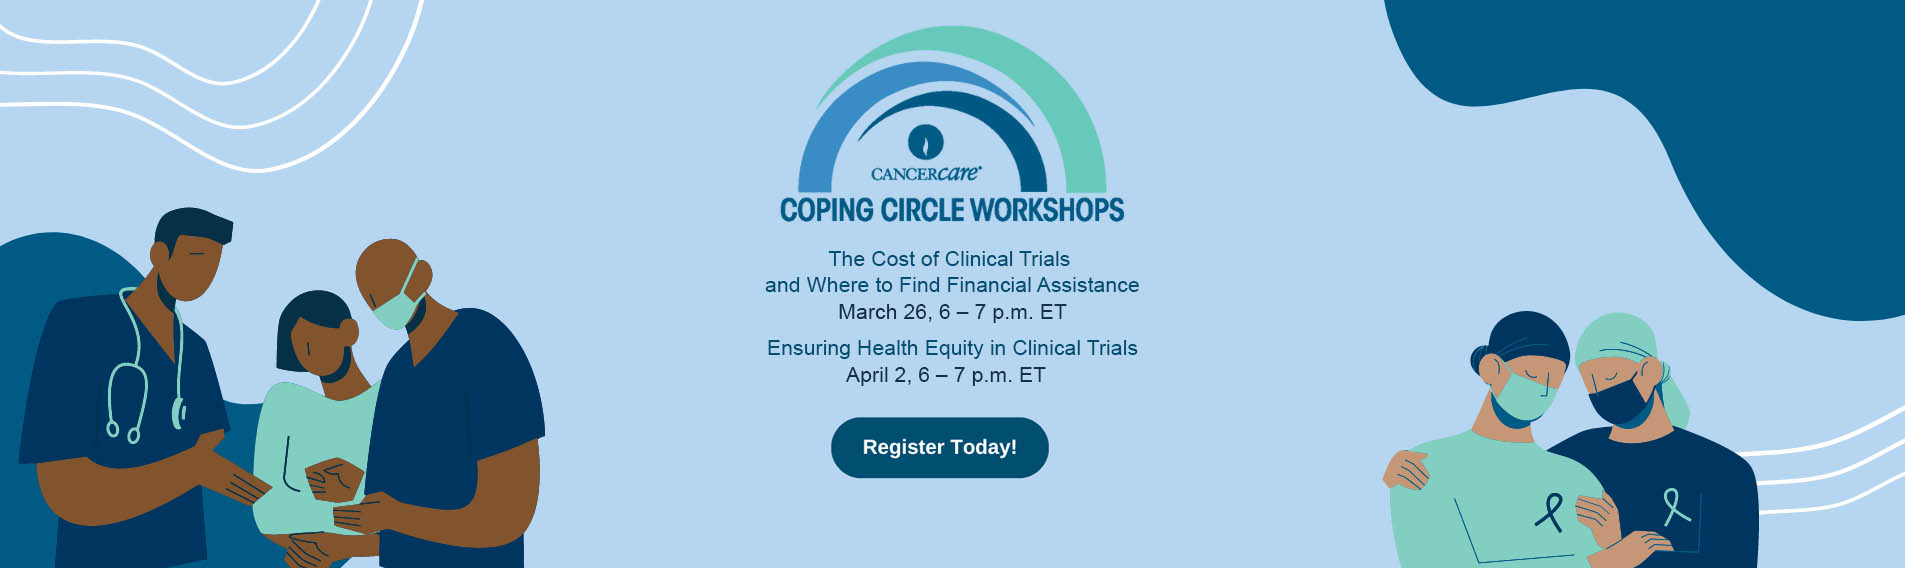 https://media.cancercare.org/image_sliders_test/Coping%20Circle%202024%20Series%20updated%203.19.24.jpg